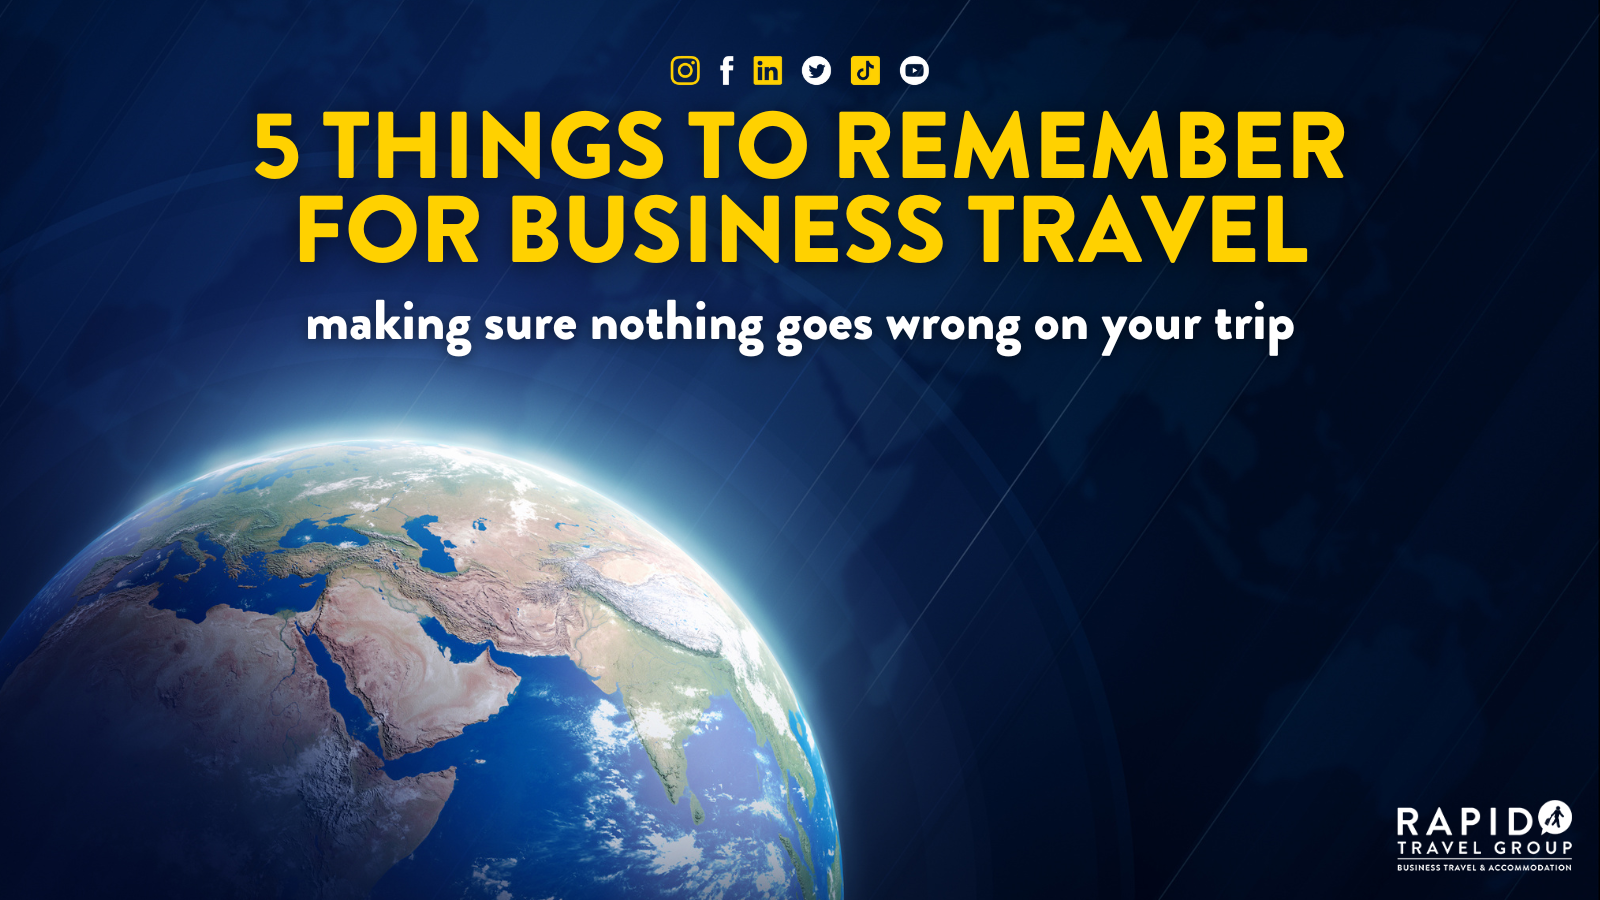 5 things to remember for business travel making sure nothing goes wrong on your trip